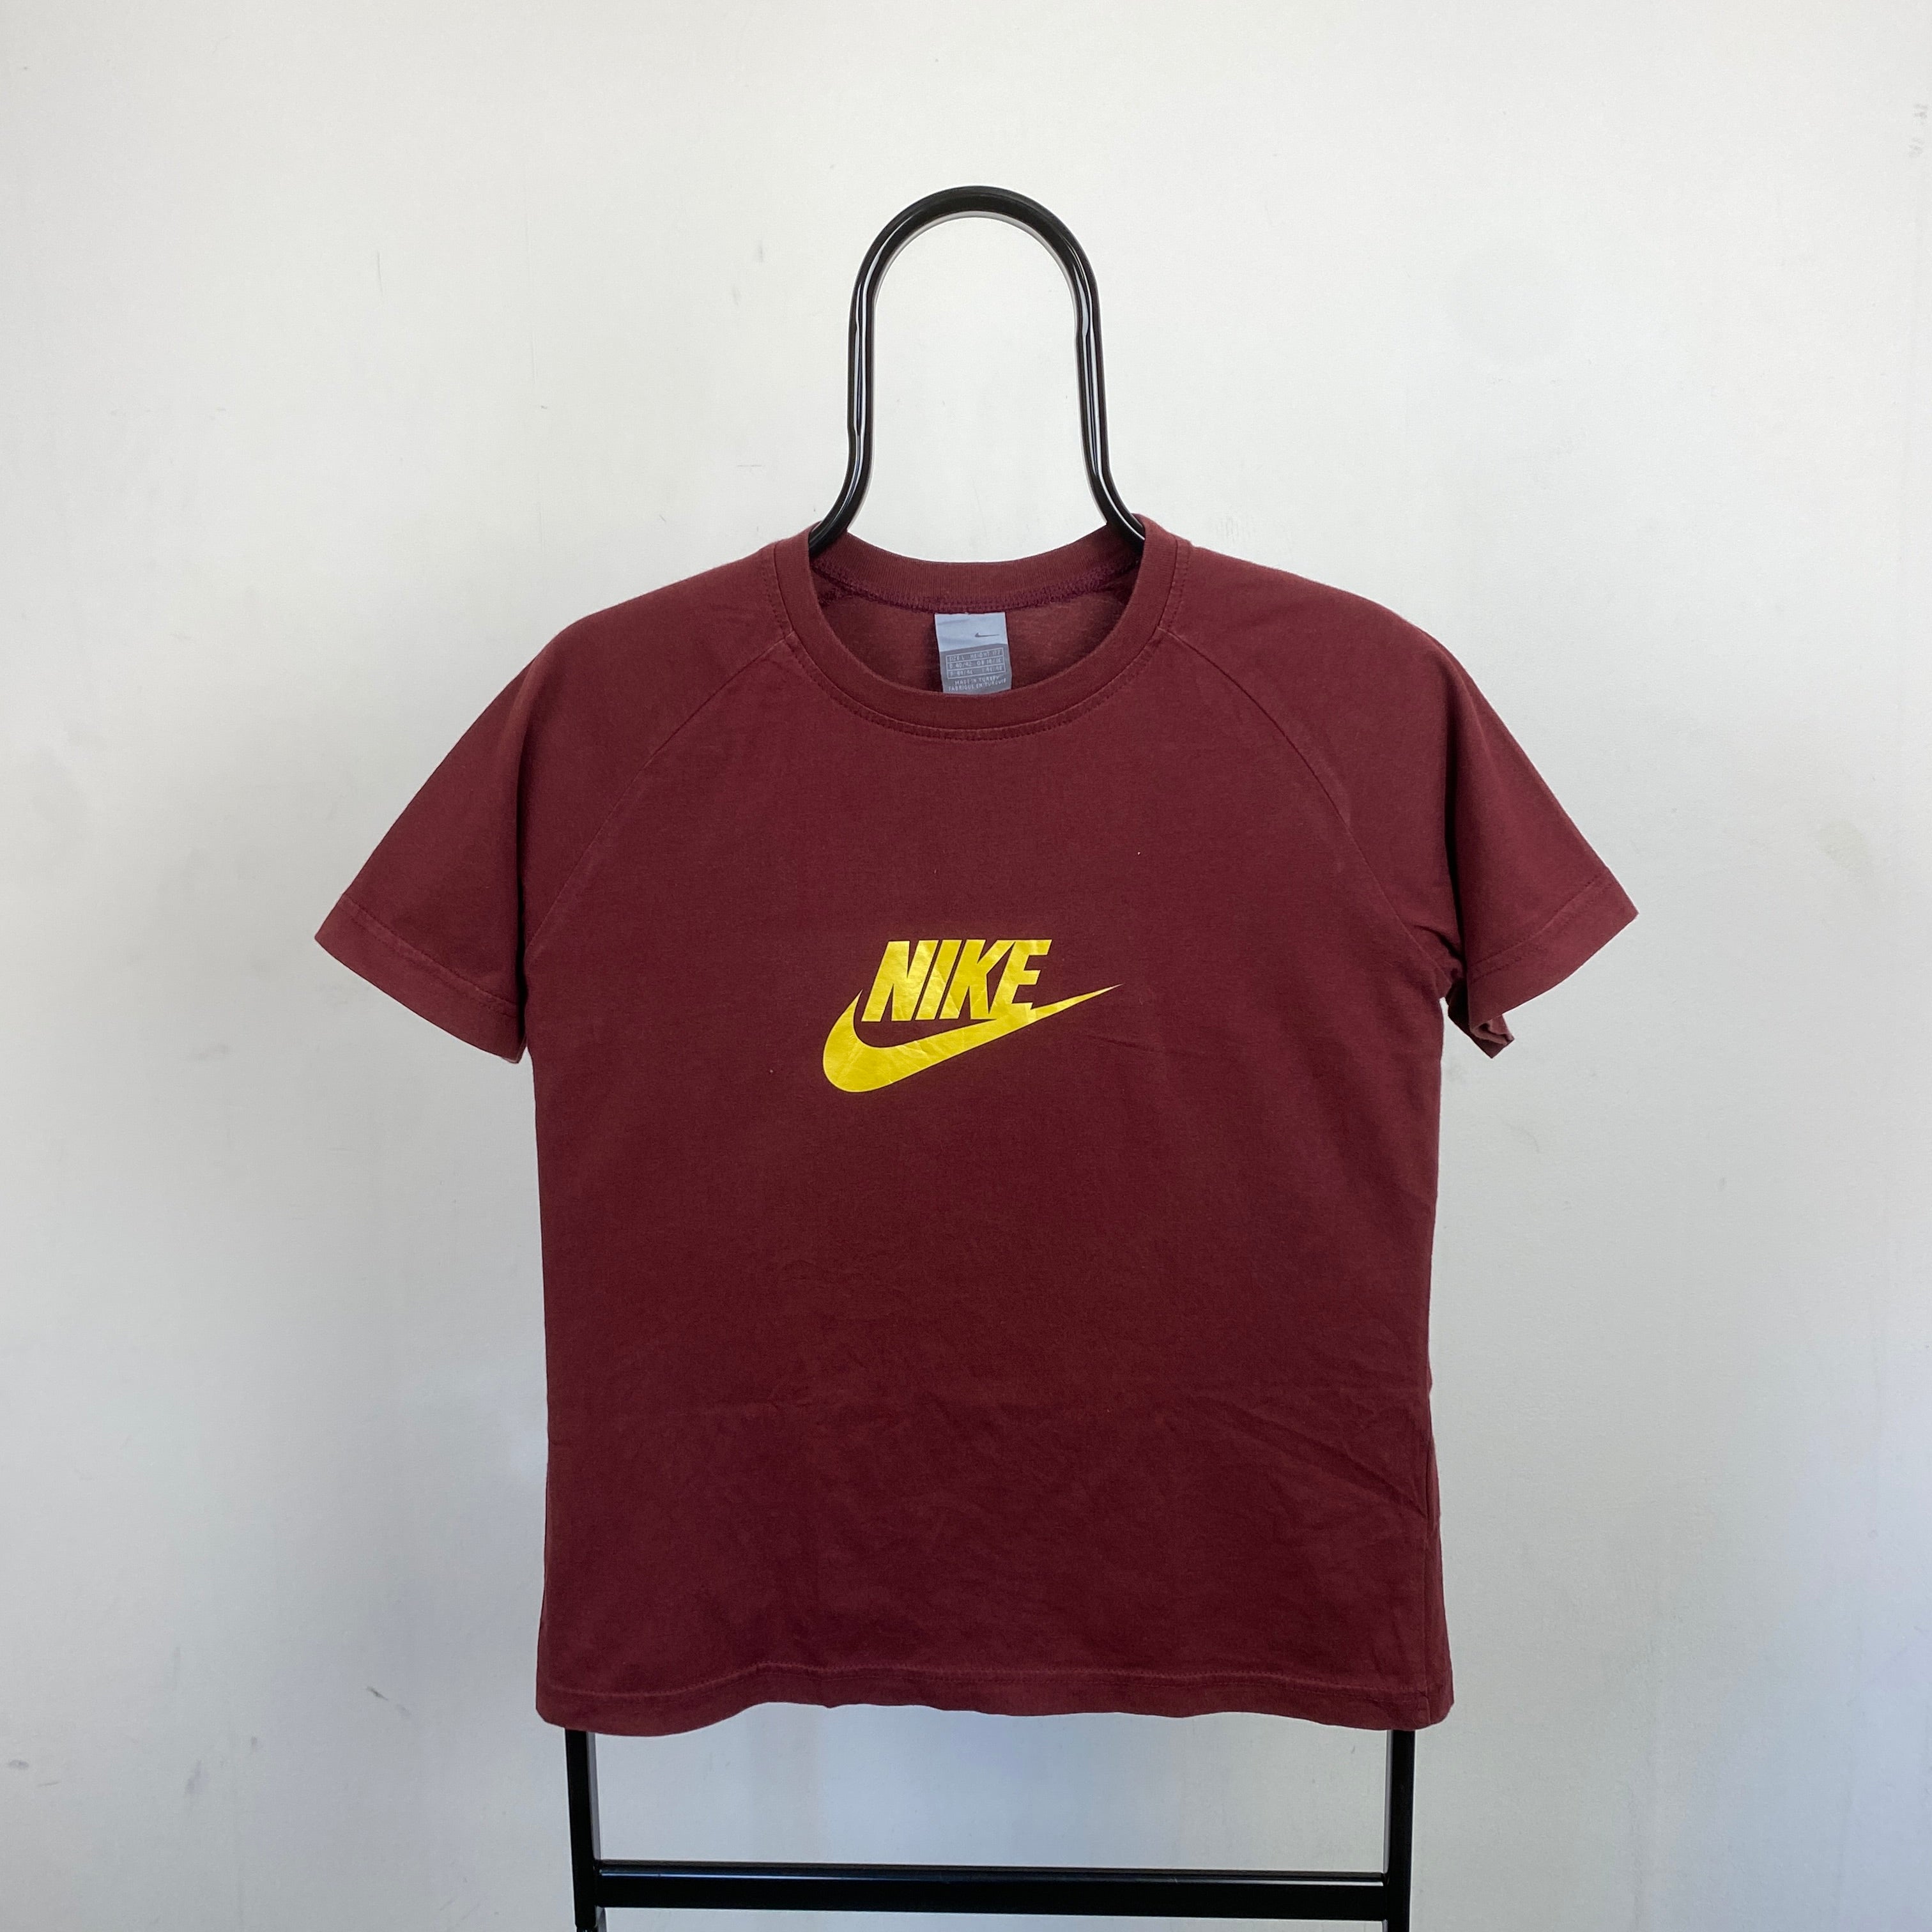 00s Nike T-Shirt Red Womens Large